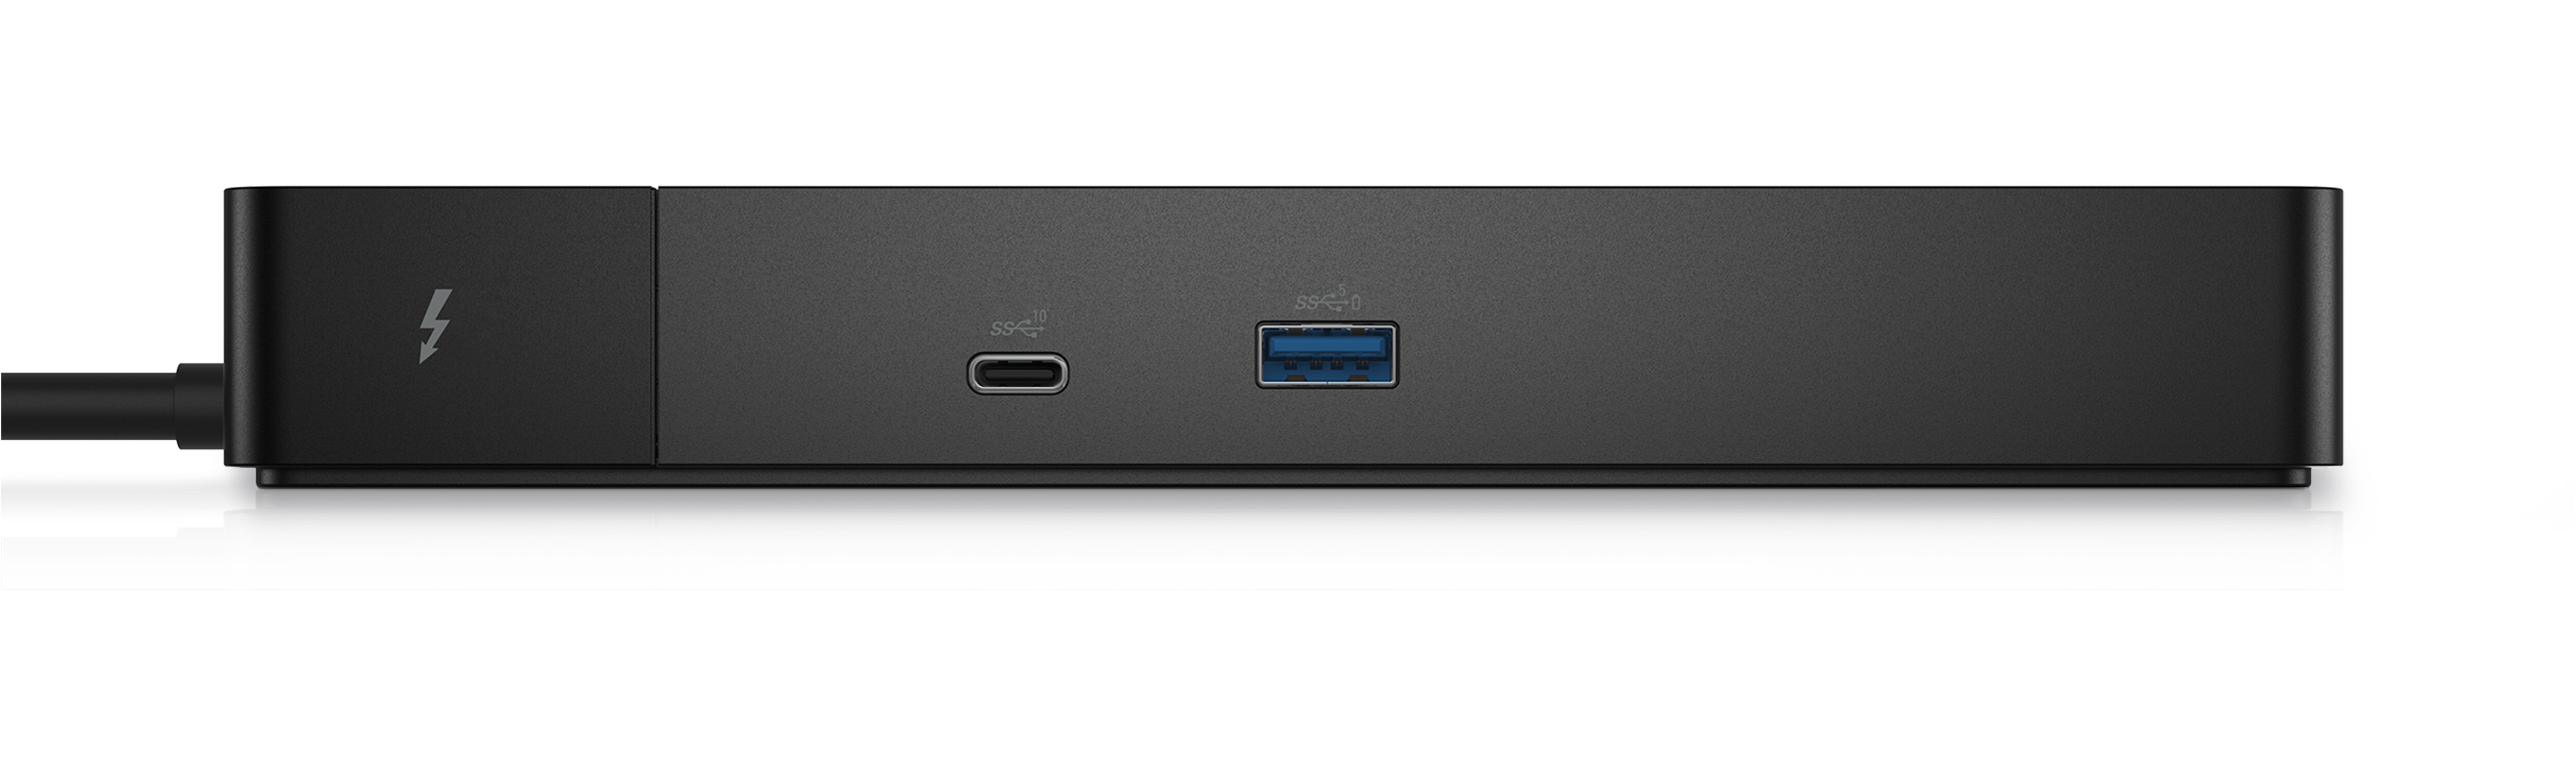 Dell Performance Portable SSD is 'world's most compact Thunderbolt